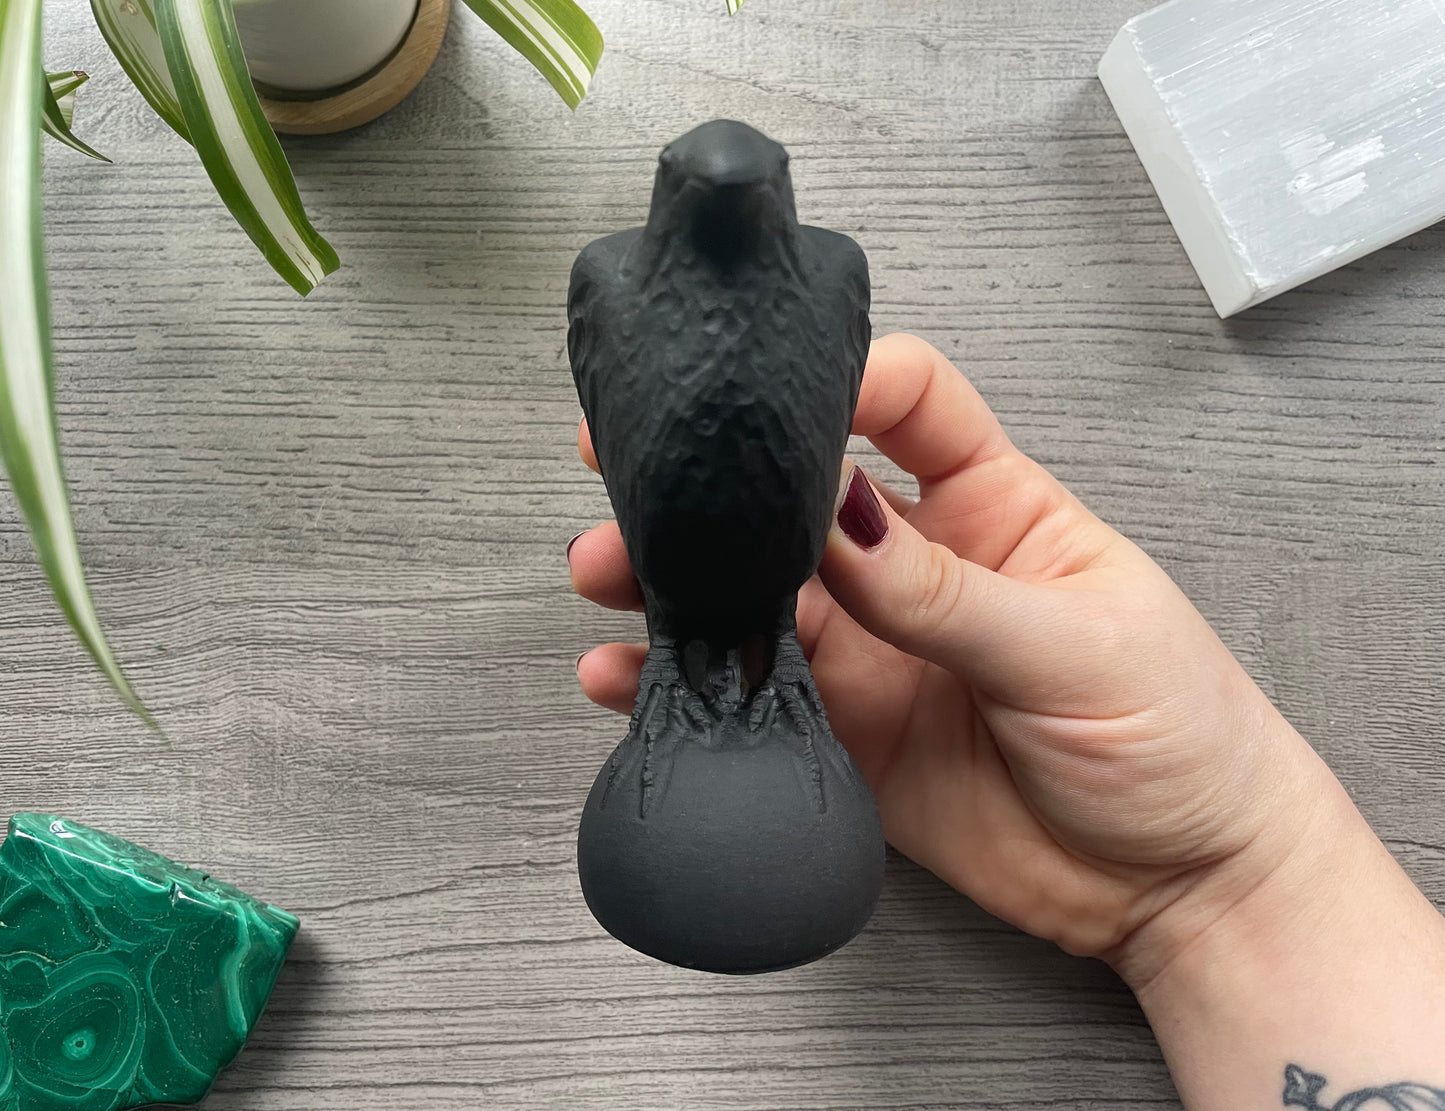 Pictured is a raven carved out of black obsidian.